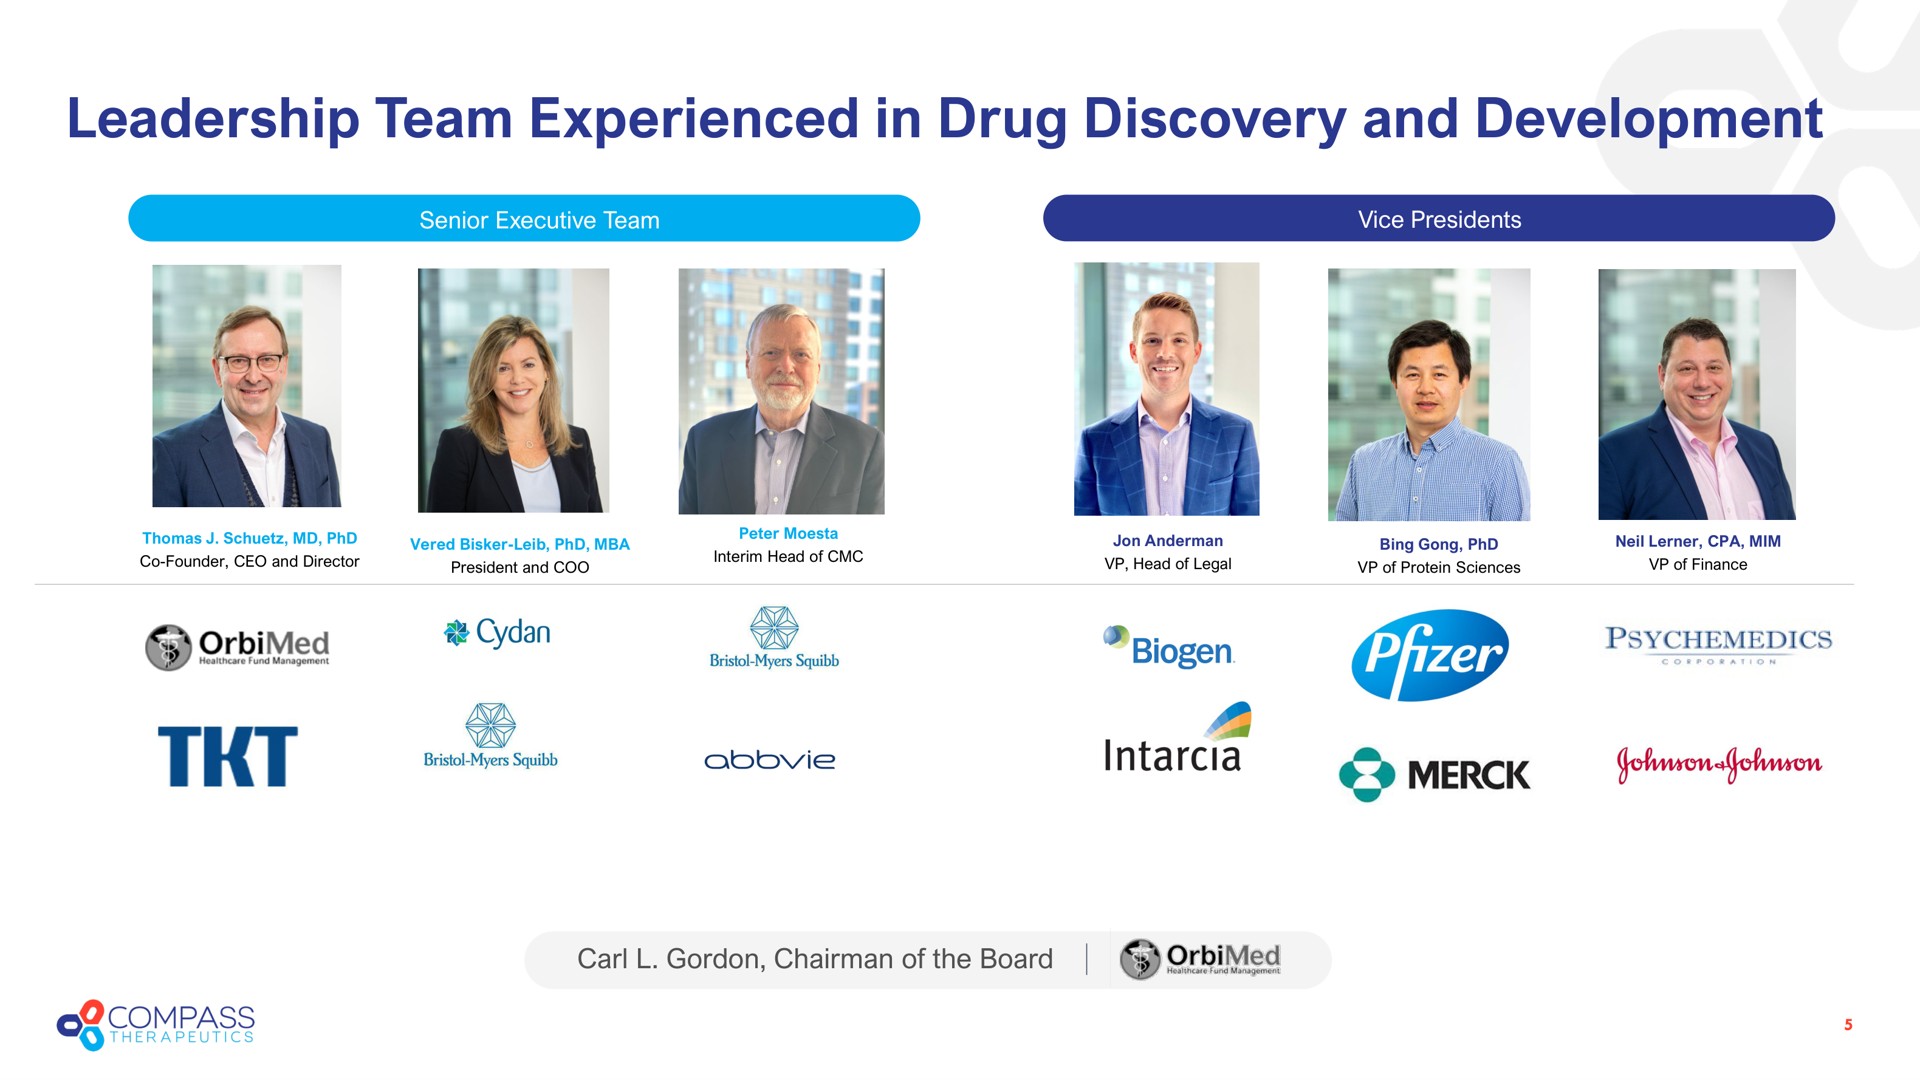 leadership team experienced in drug discovery and development | Compass Therapeutics